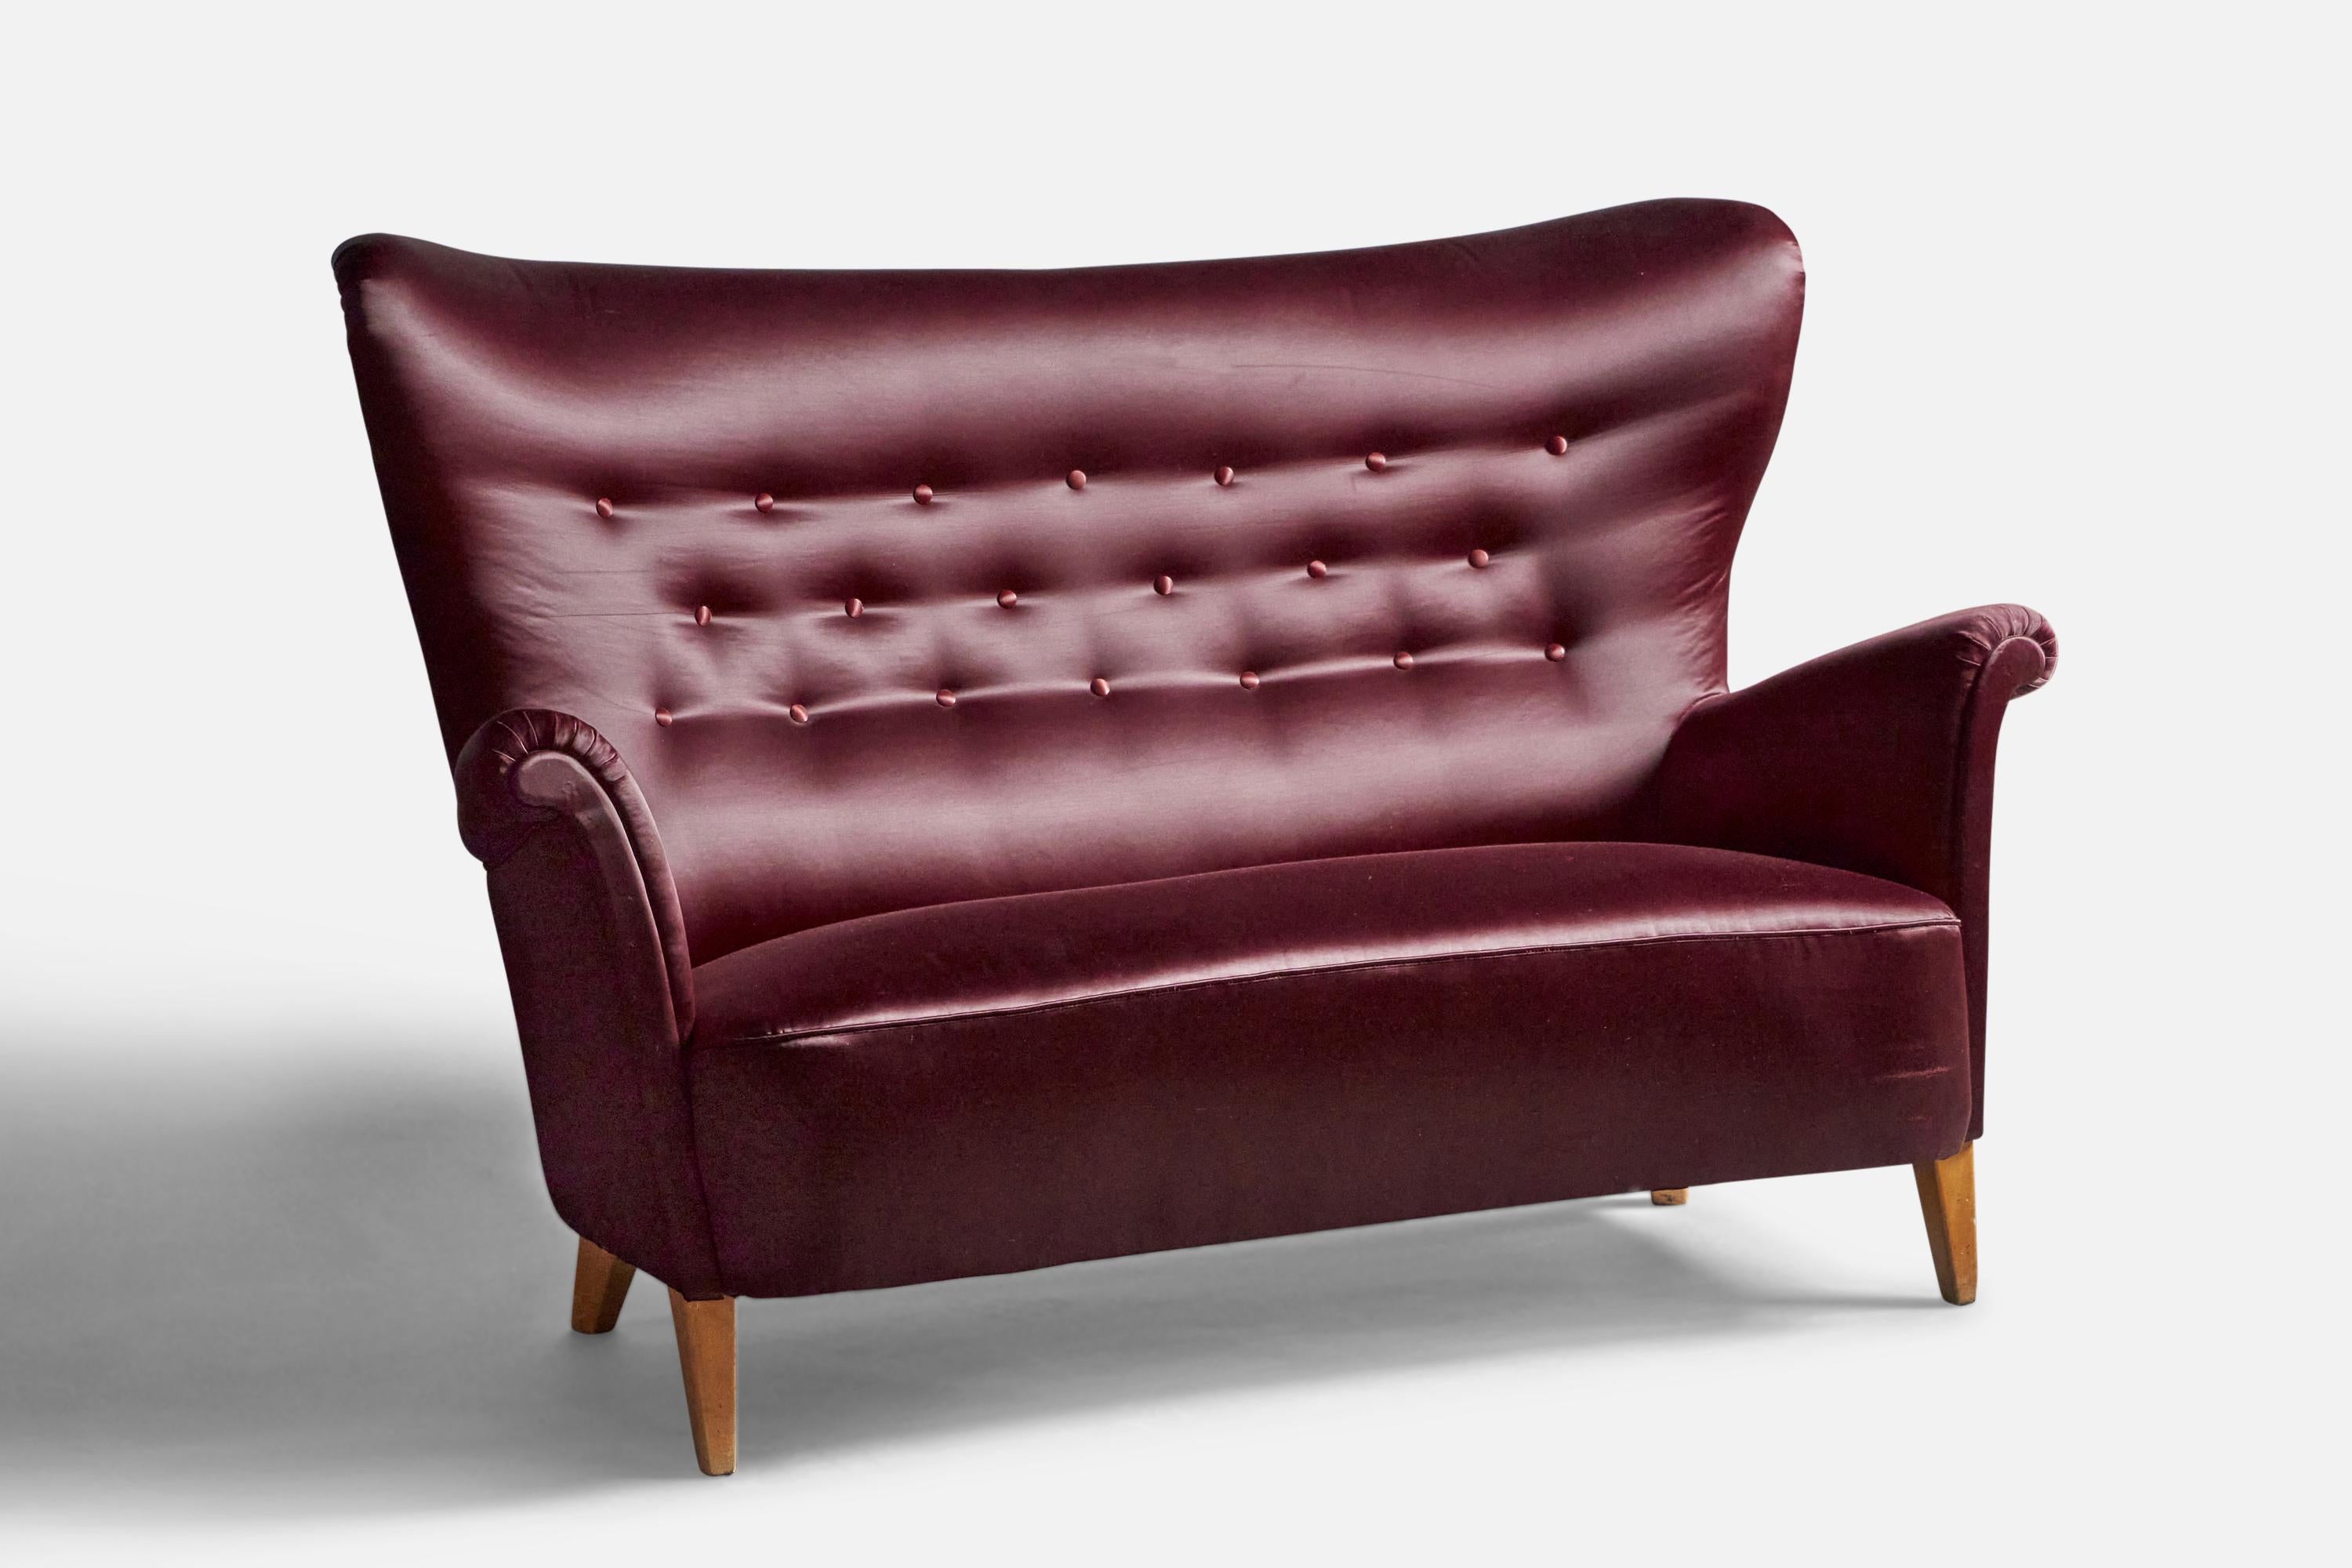 A purple velvet and birch sofa, designed and produced by Carl Malmsten, Sweden, c. 1940s.